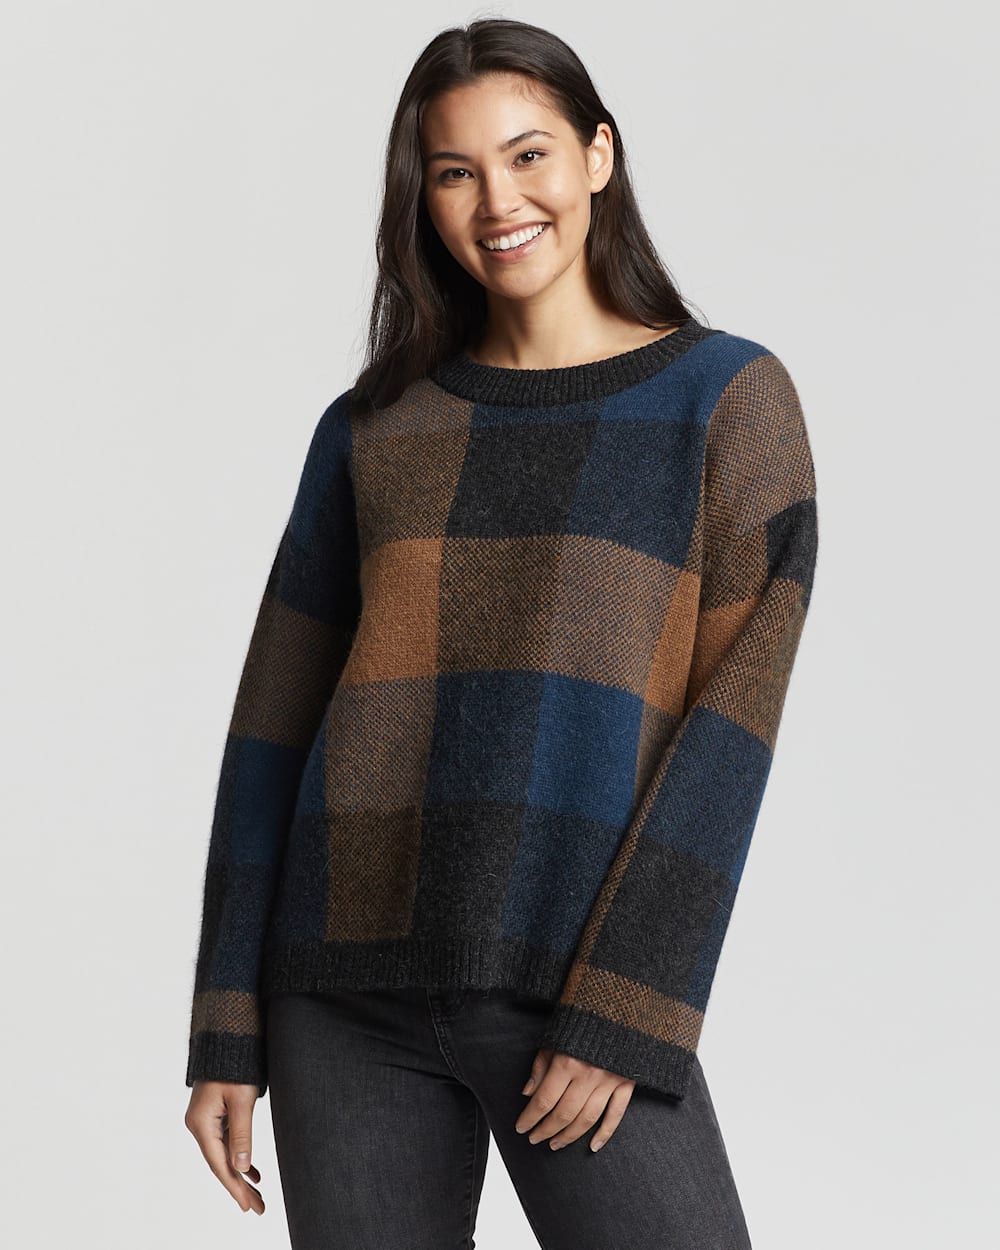 WOMEN'S ALPACA CHECK SWEATER IN CHARCOAL MULTI image number 1